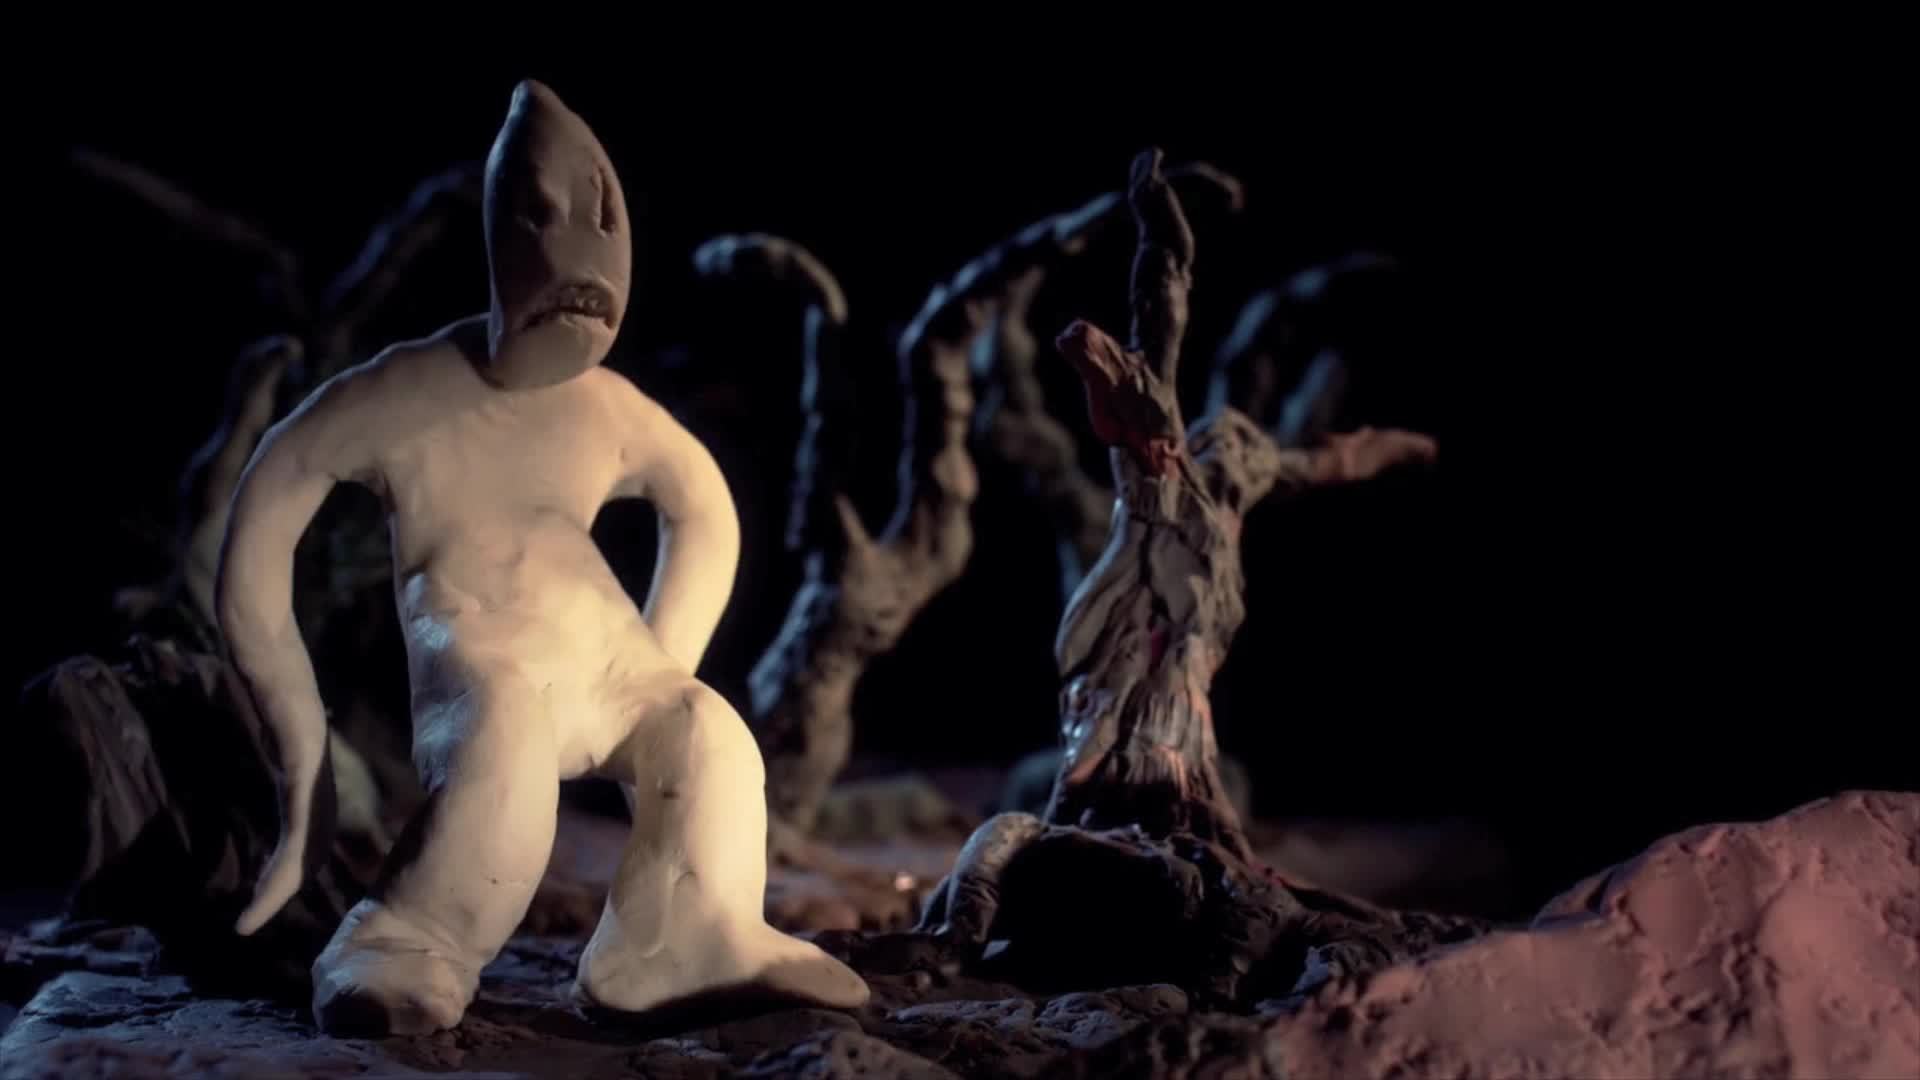 This Music Video has used Beautiful Claymation